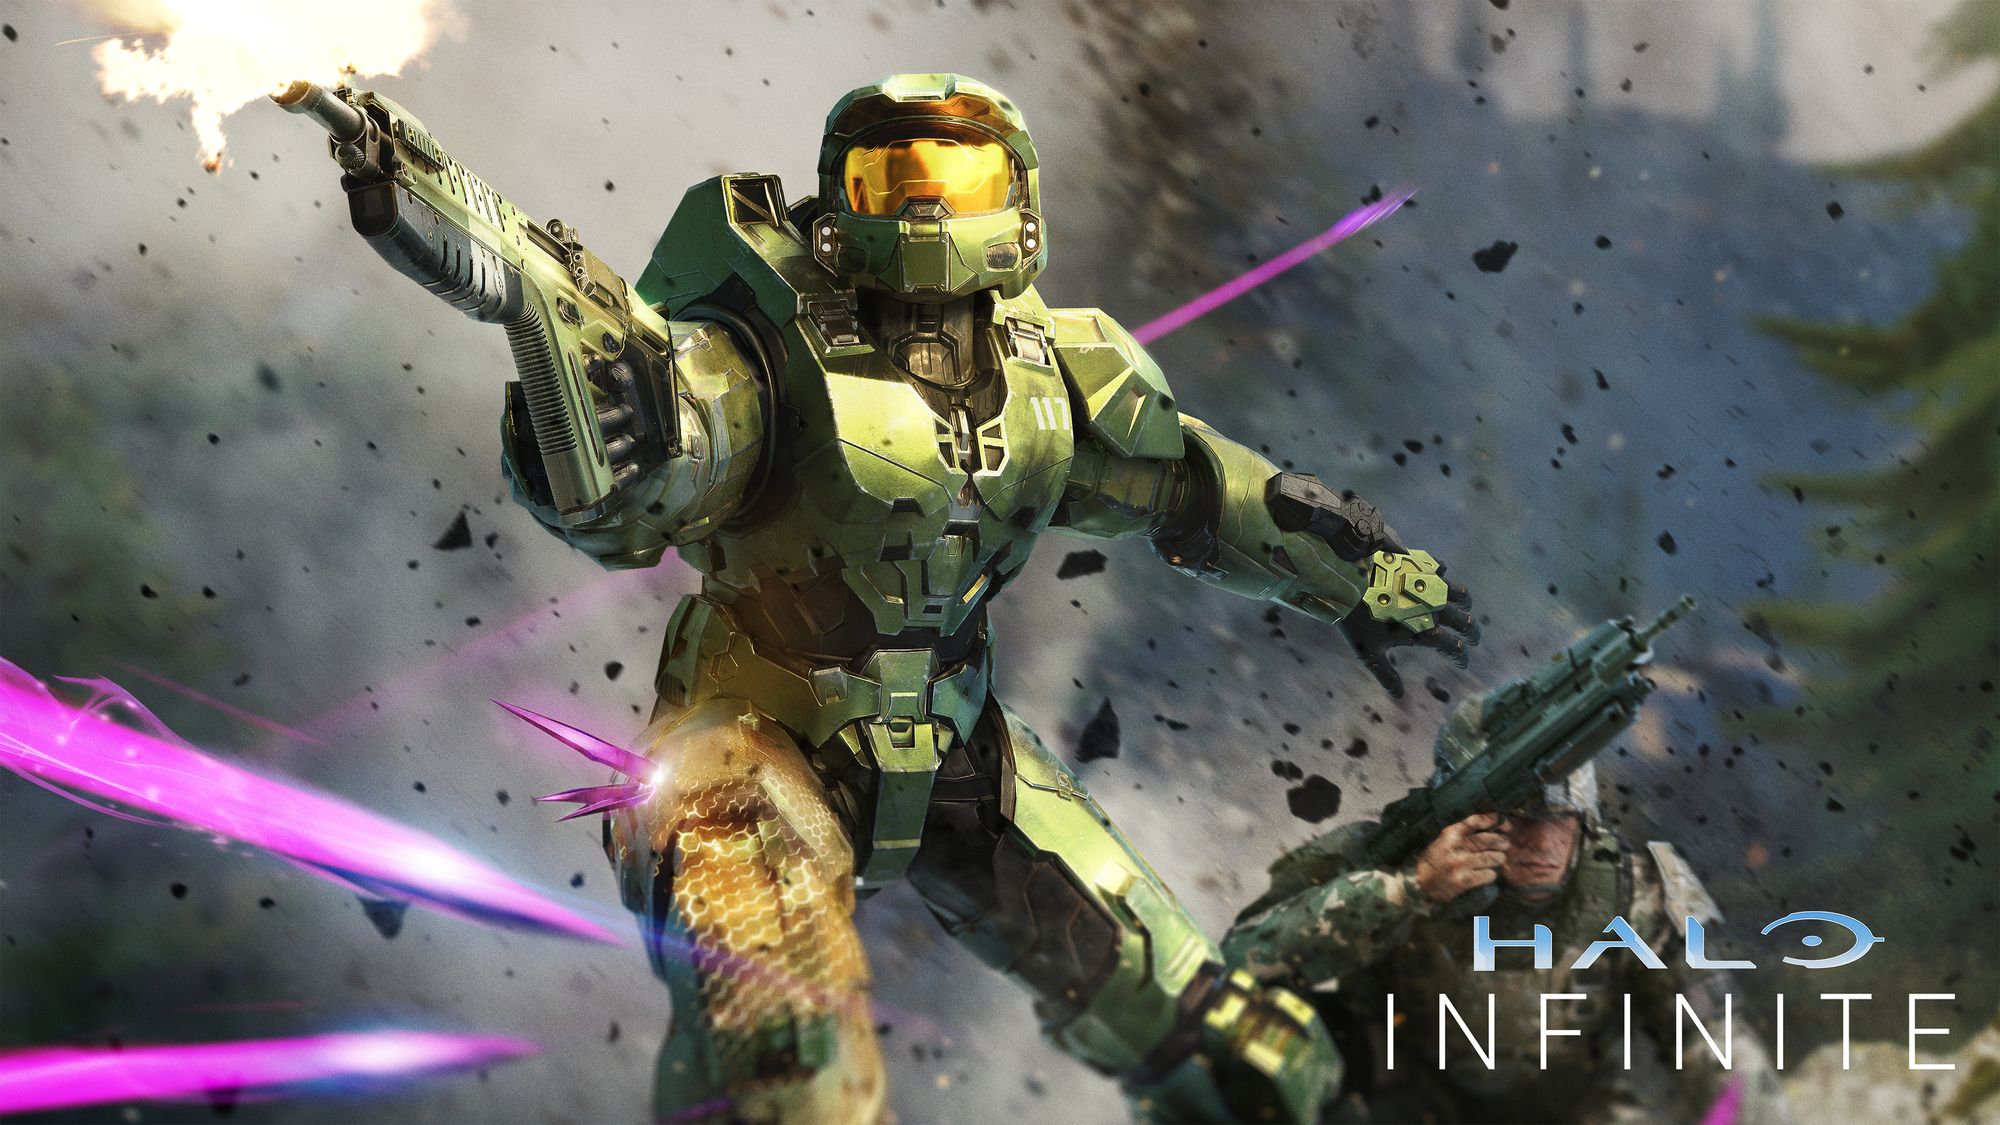 Will There Be A Halo Season 2? About Halo season 2 - News